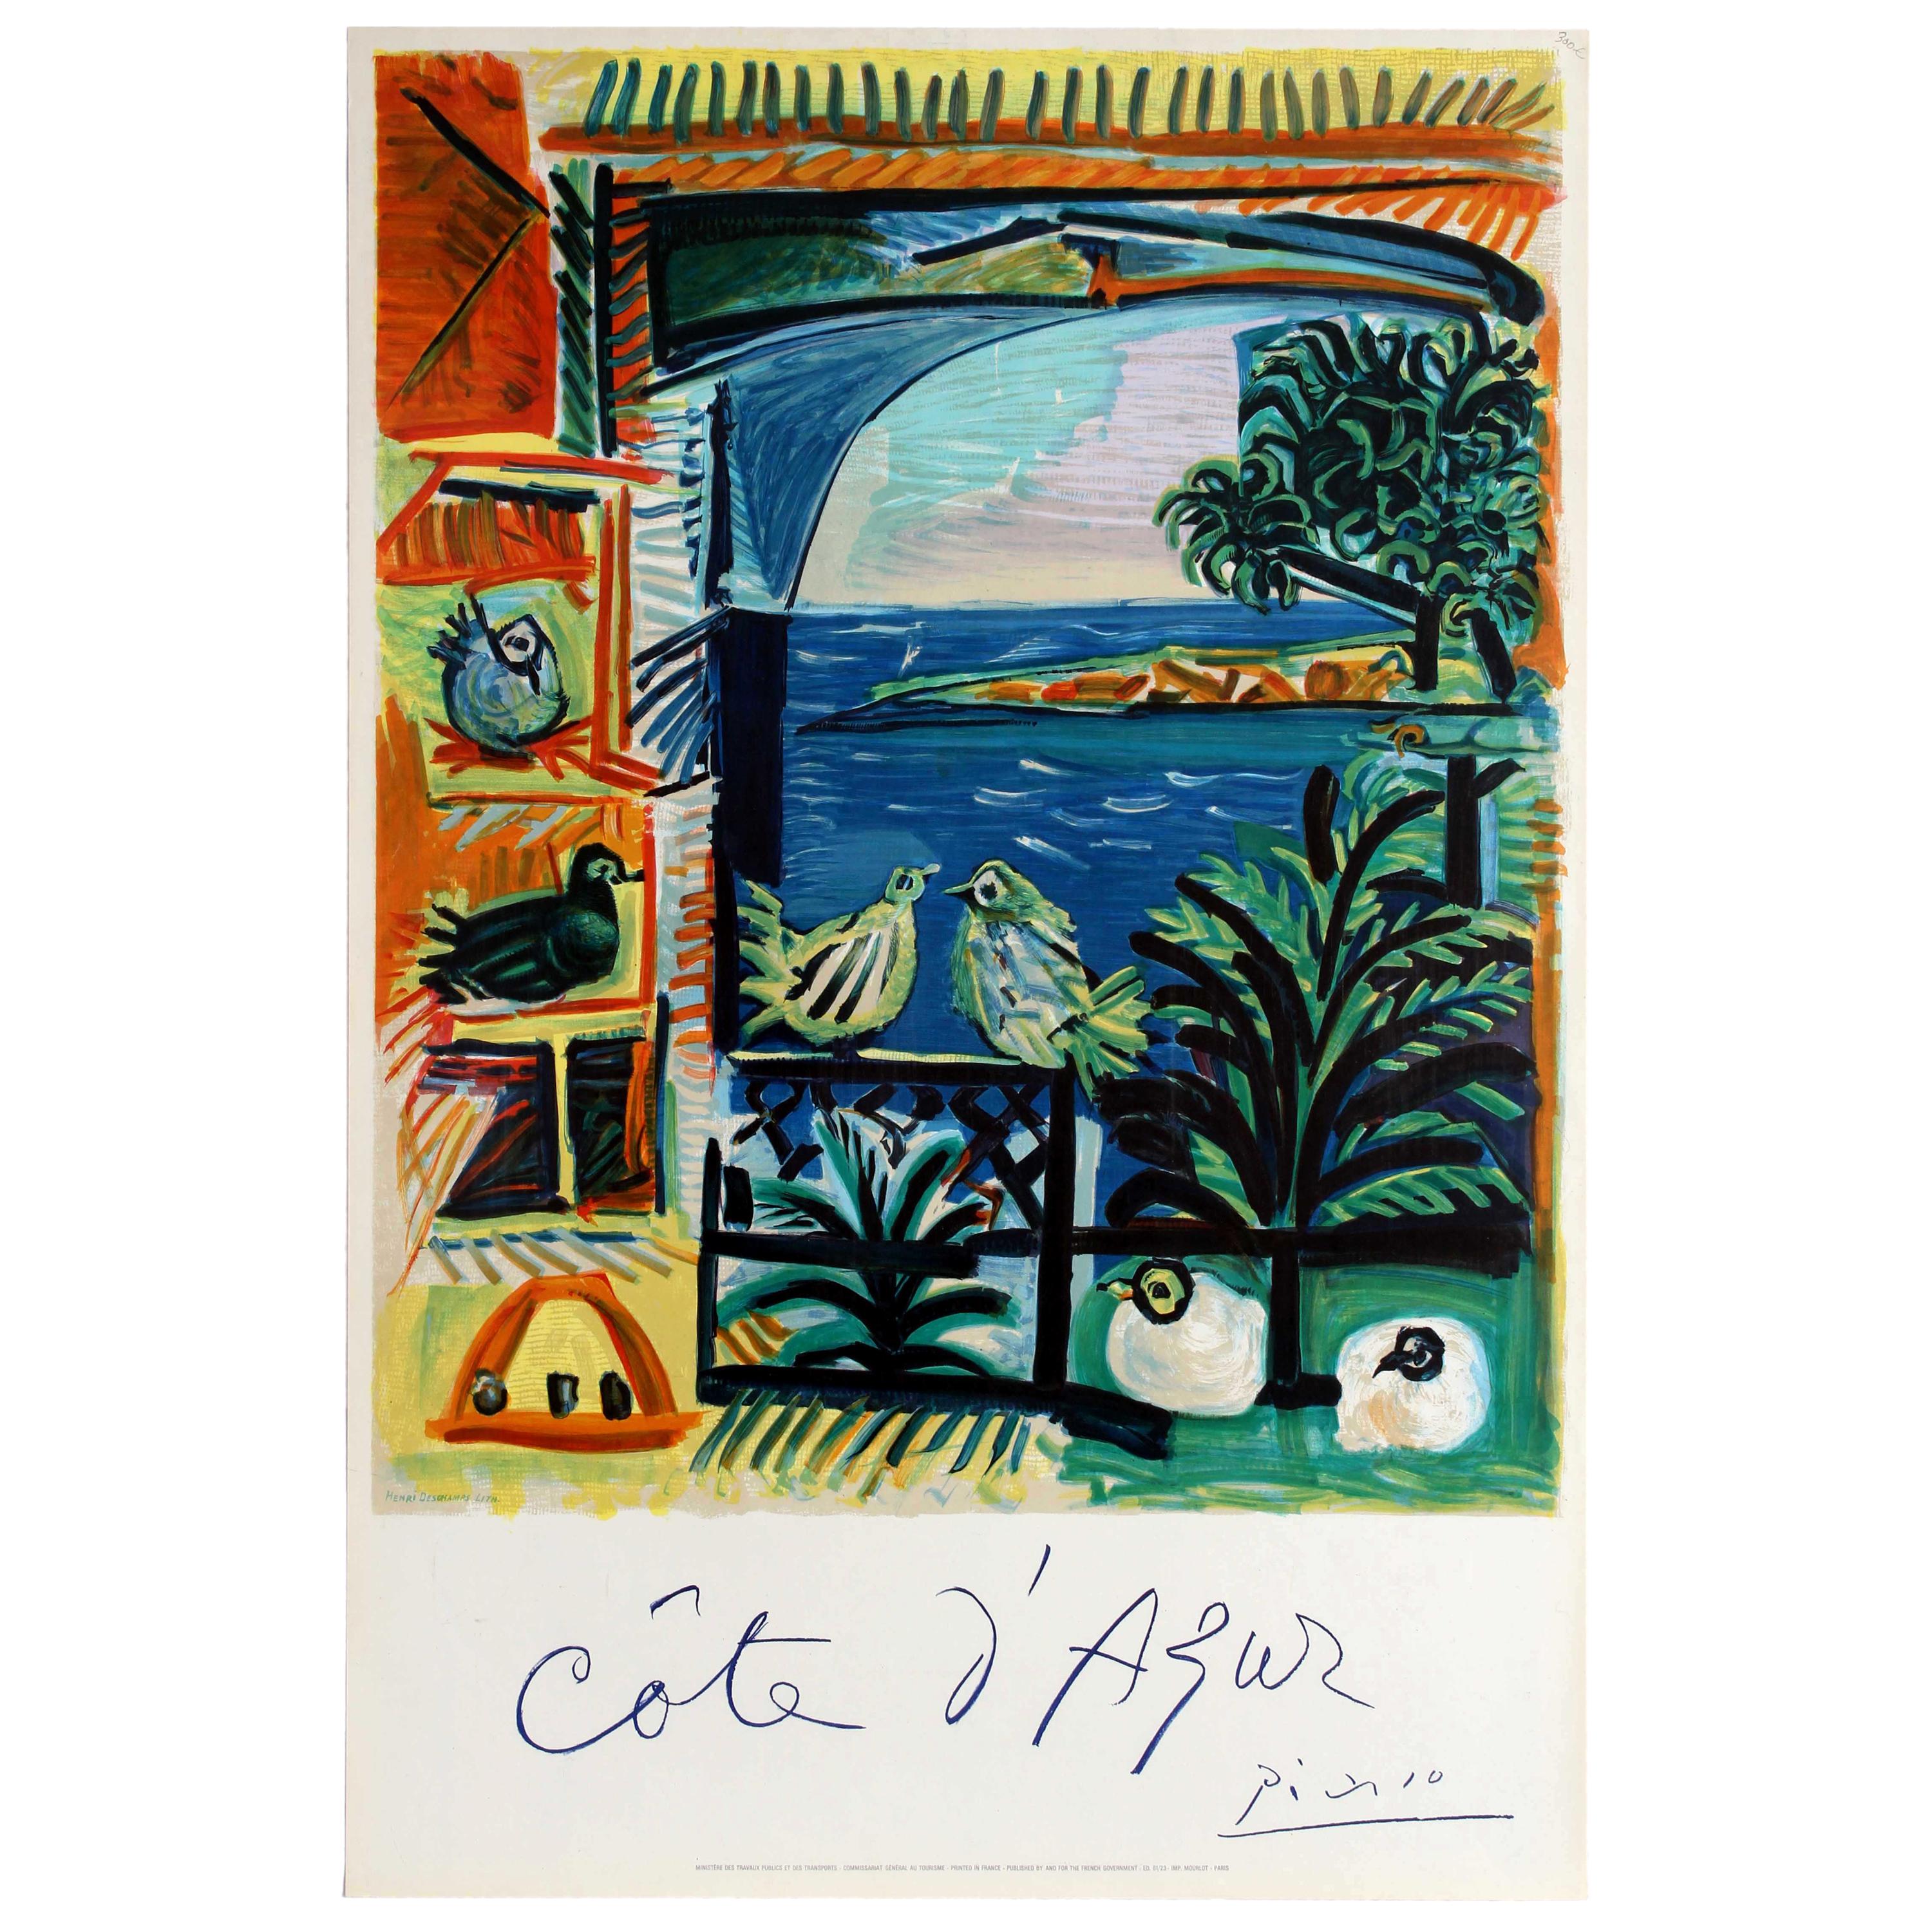 Original Vintage Cote D'Azur Travel Poster by Picasso French Riviera Sea View